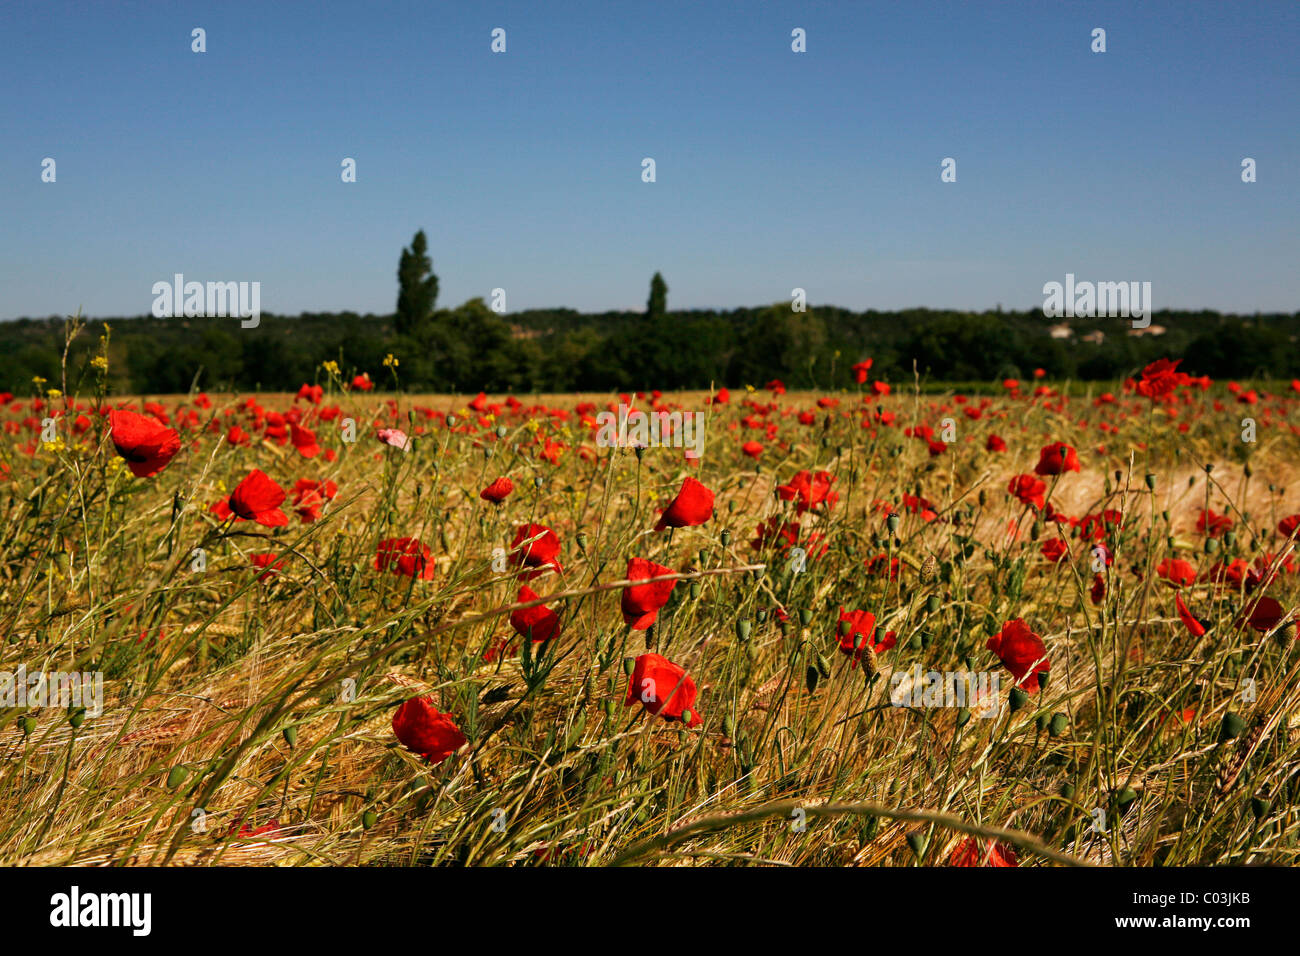 Wheat field with poppies near Le Pegu, Provence, France, Europe Stock Photo